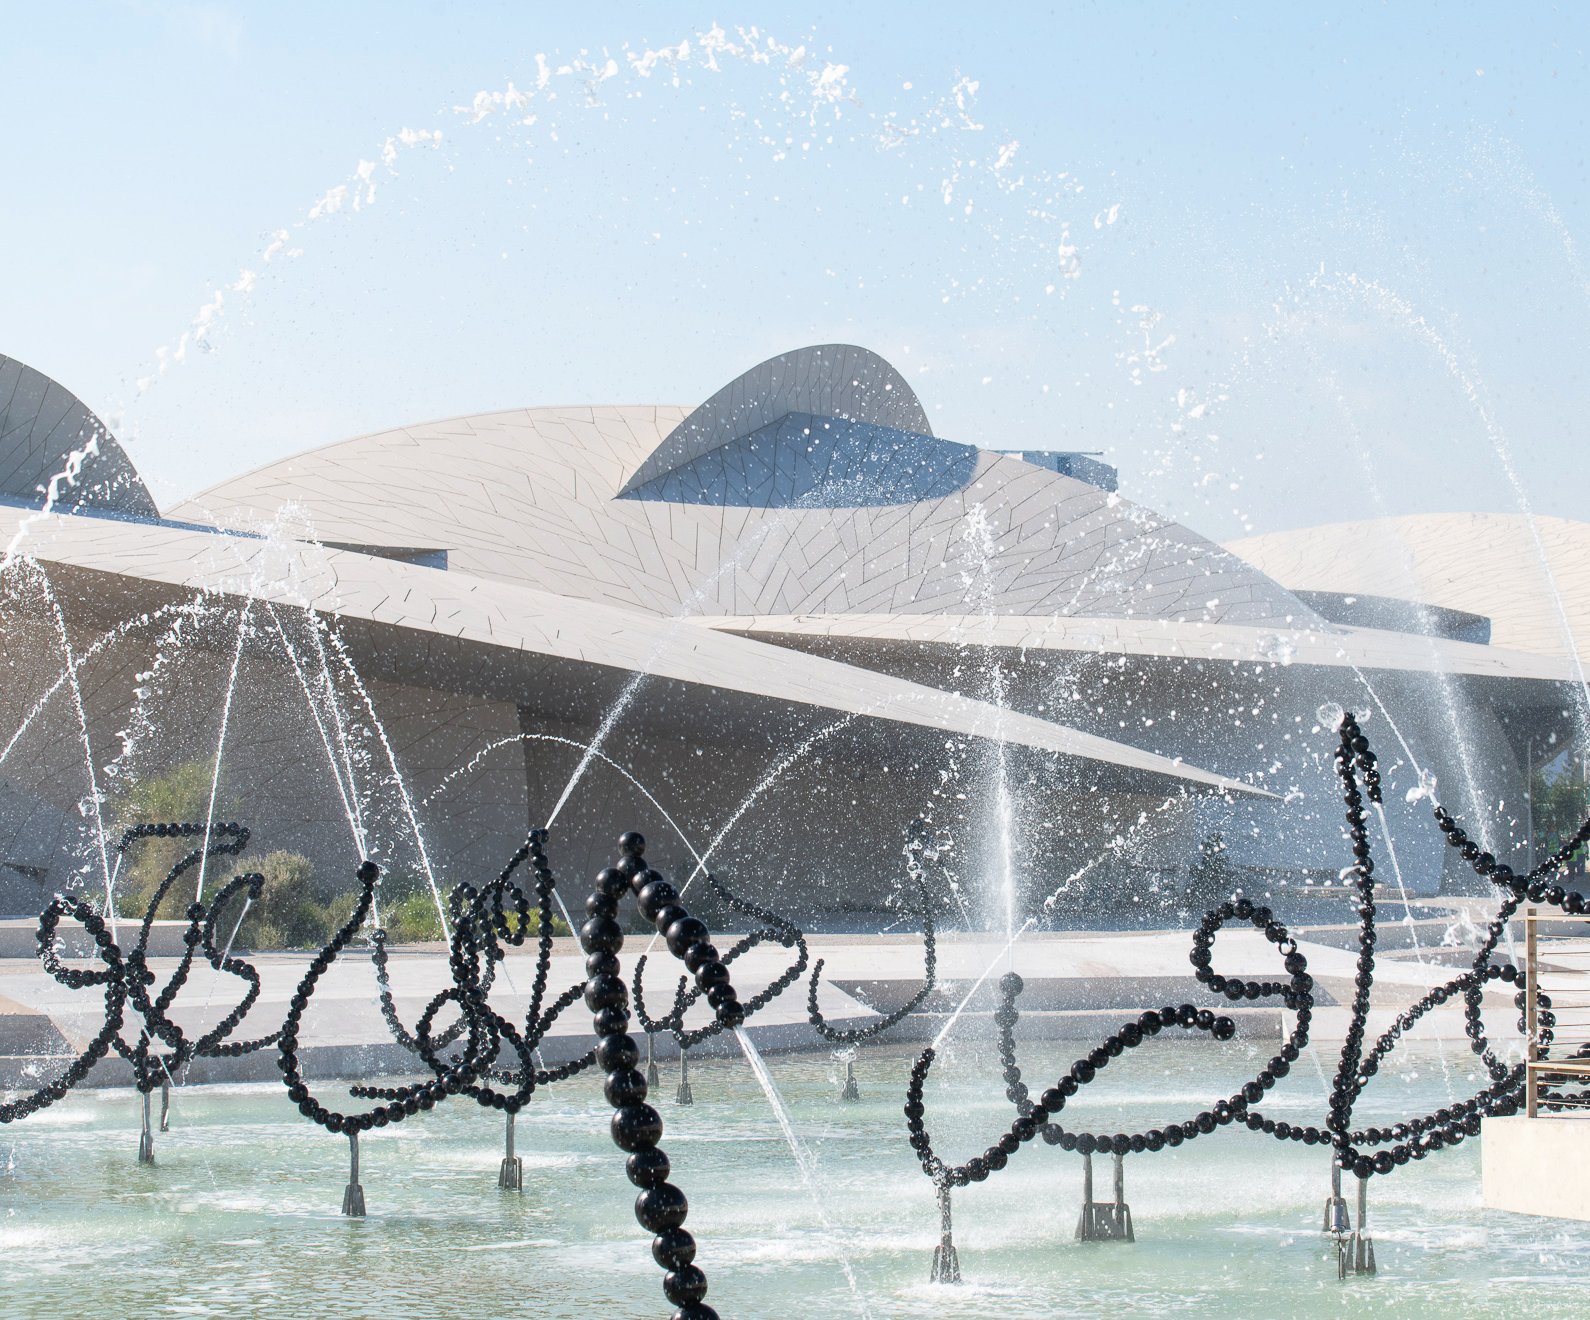 Qatar Museums Announce Re-Opening Timings Of It’s Galleries, Restaurants and Playgrounds From 28 May